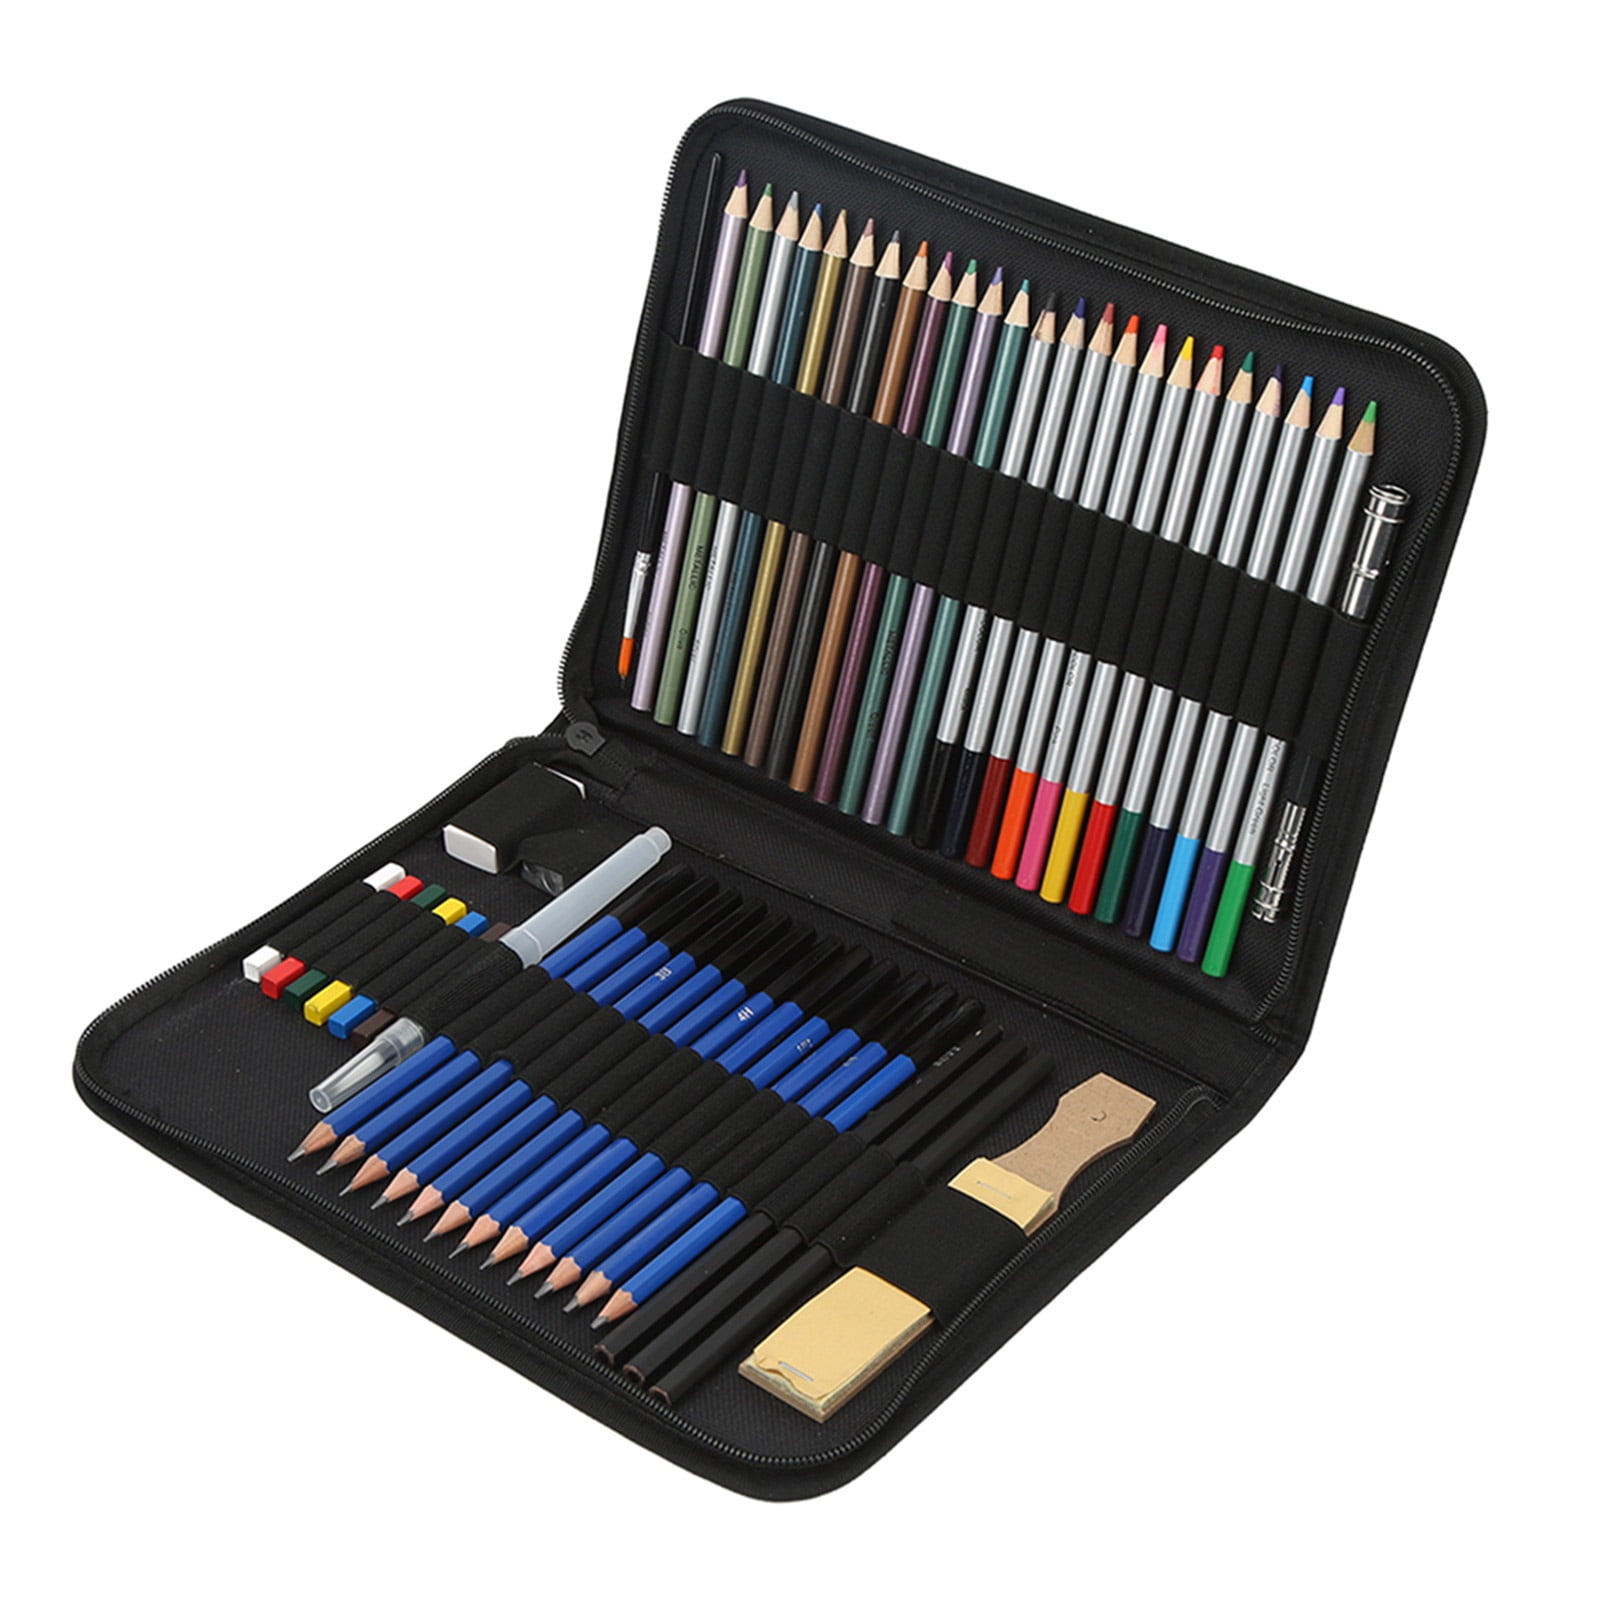  Drawing Pencils Kit Drawing Set Drawing Kit Sketch Set Sketch  Pencils Kit Drawing Pencils Kit Professional ting Sketch Colored Pencil Set  s Adult ting Art Supplies : Everything Else